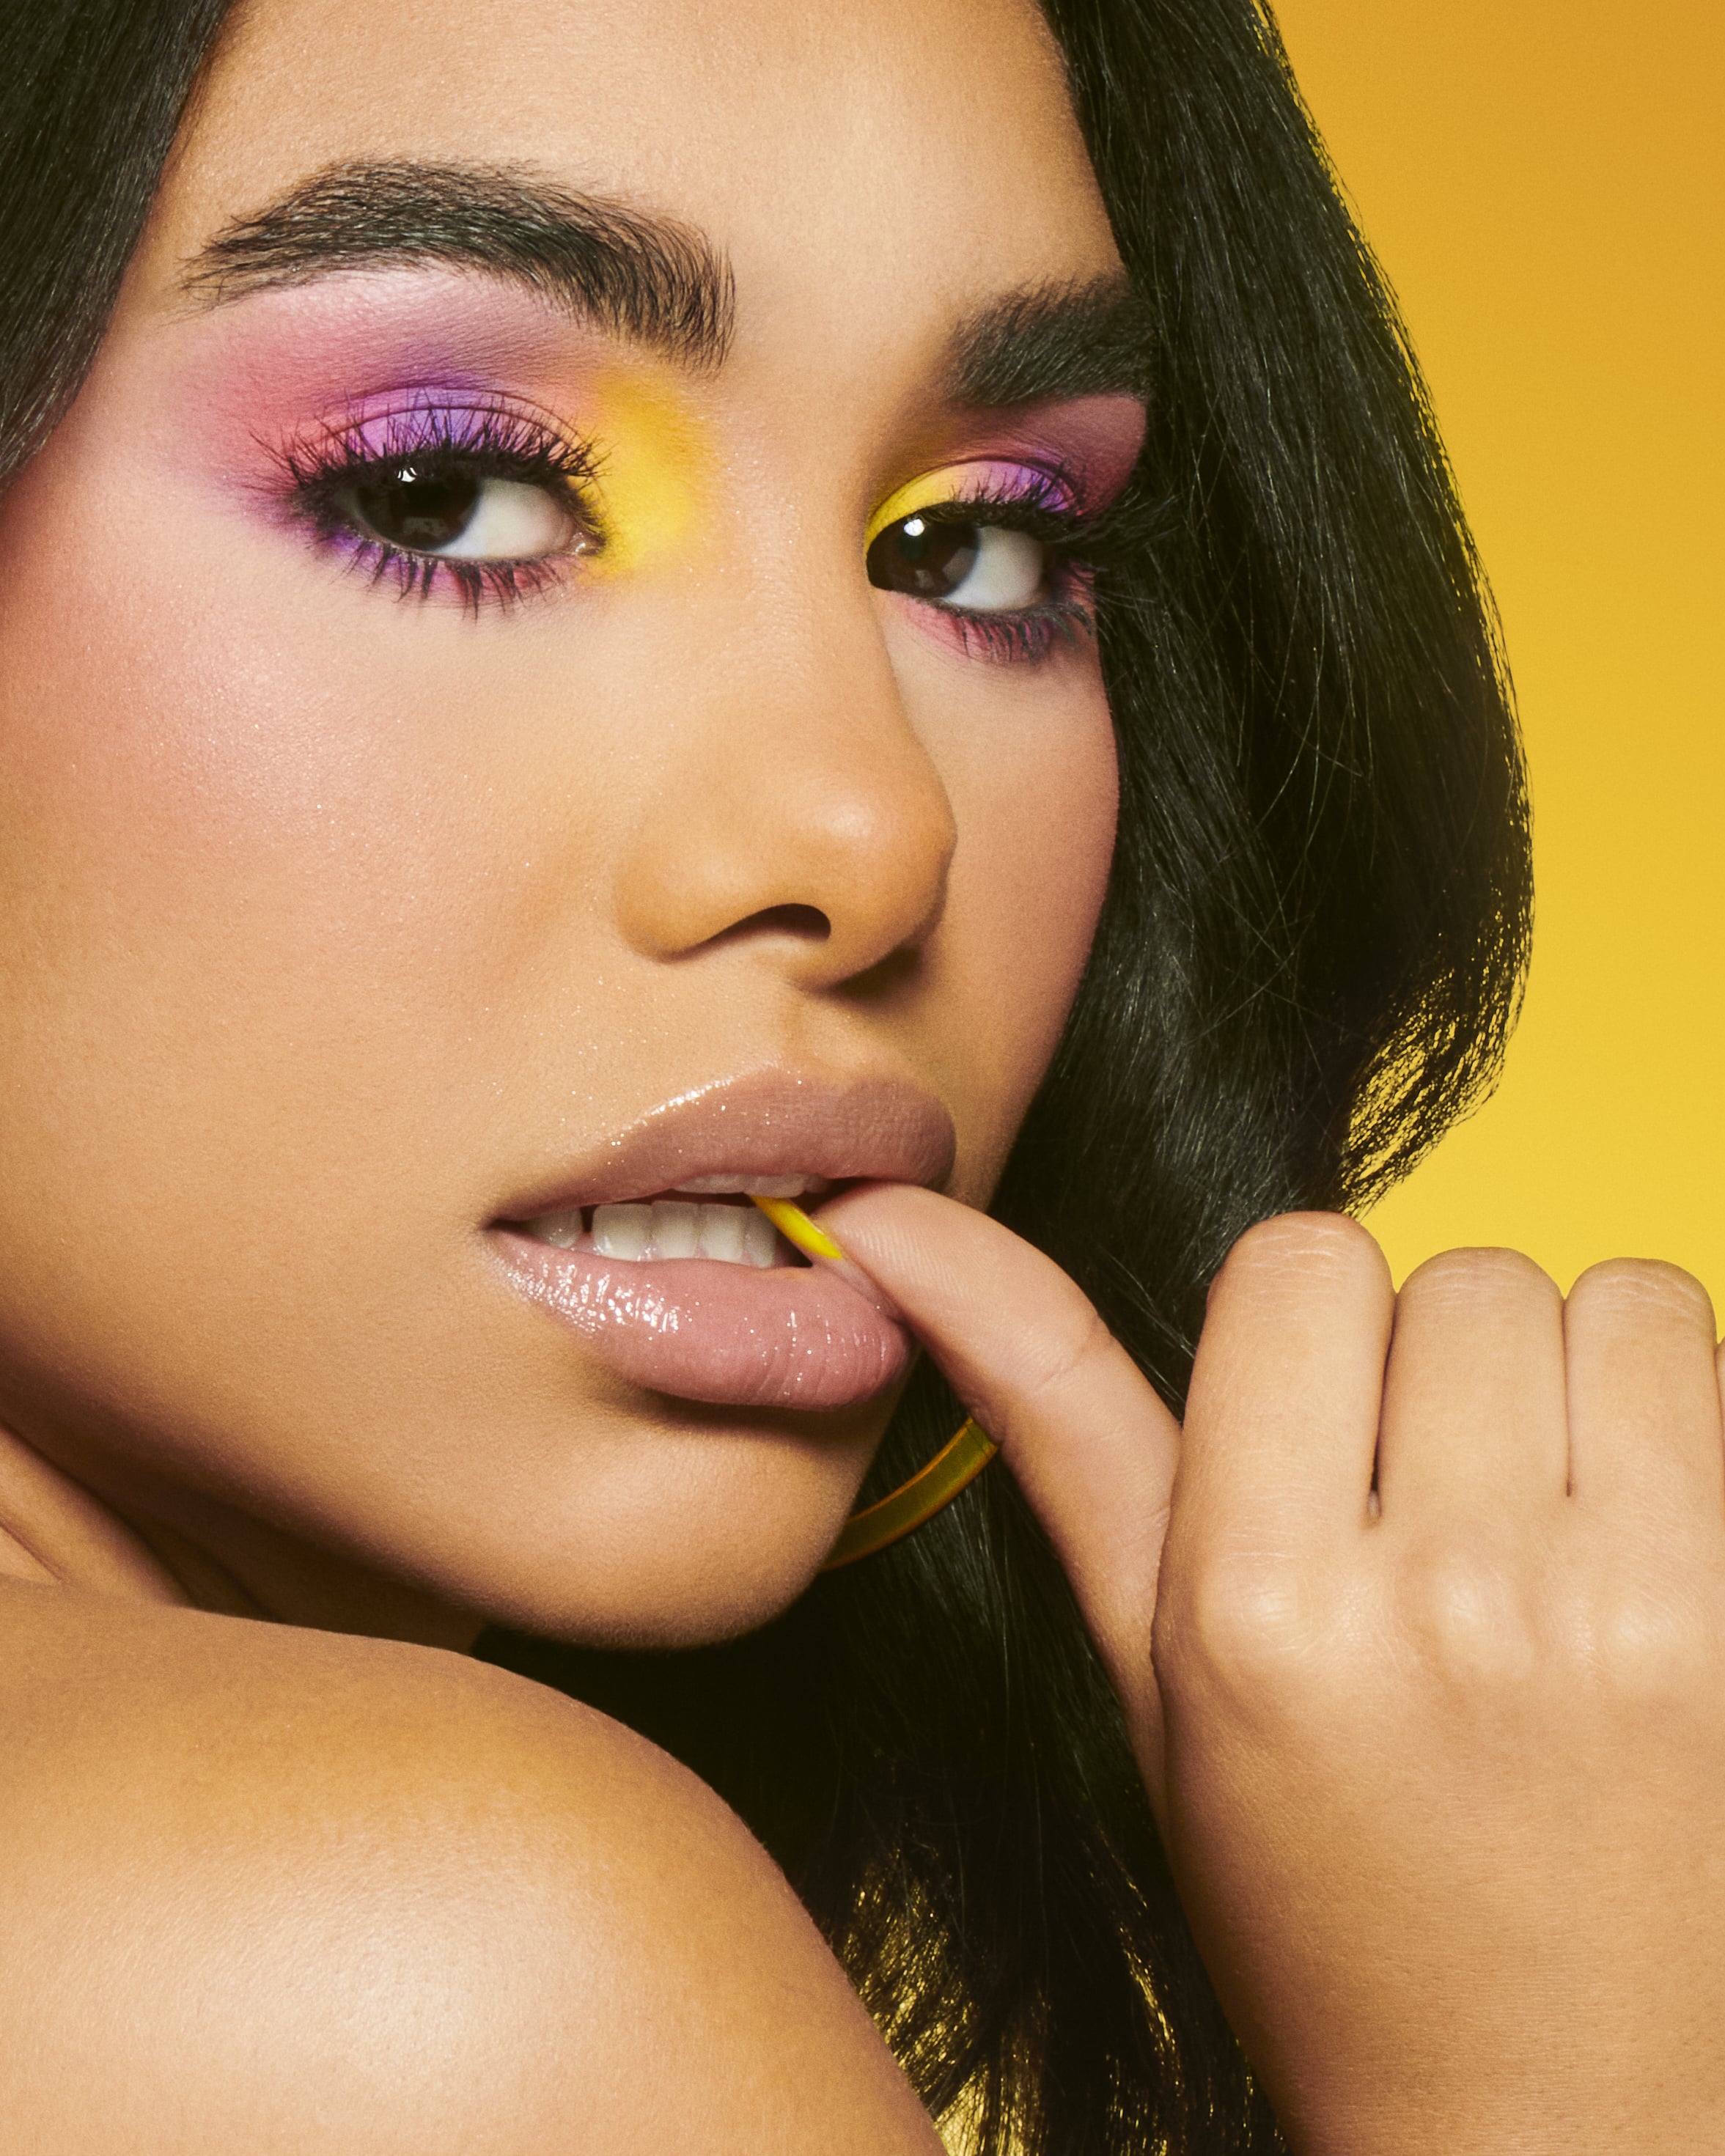 Morphe Is Launching a Sour Patch Kids Makeup Collection